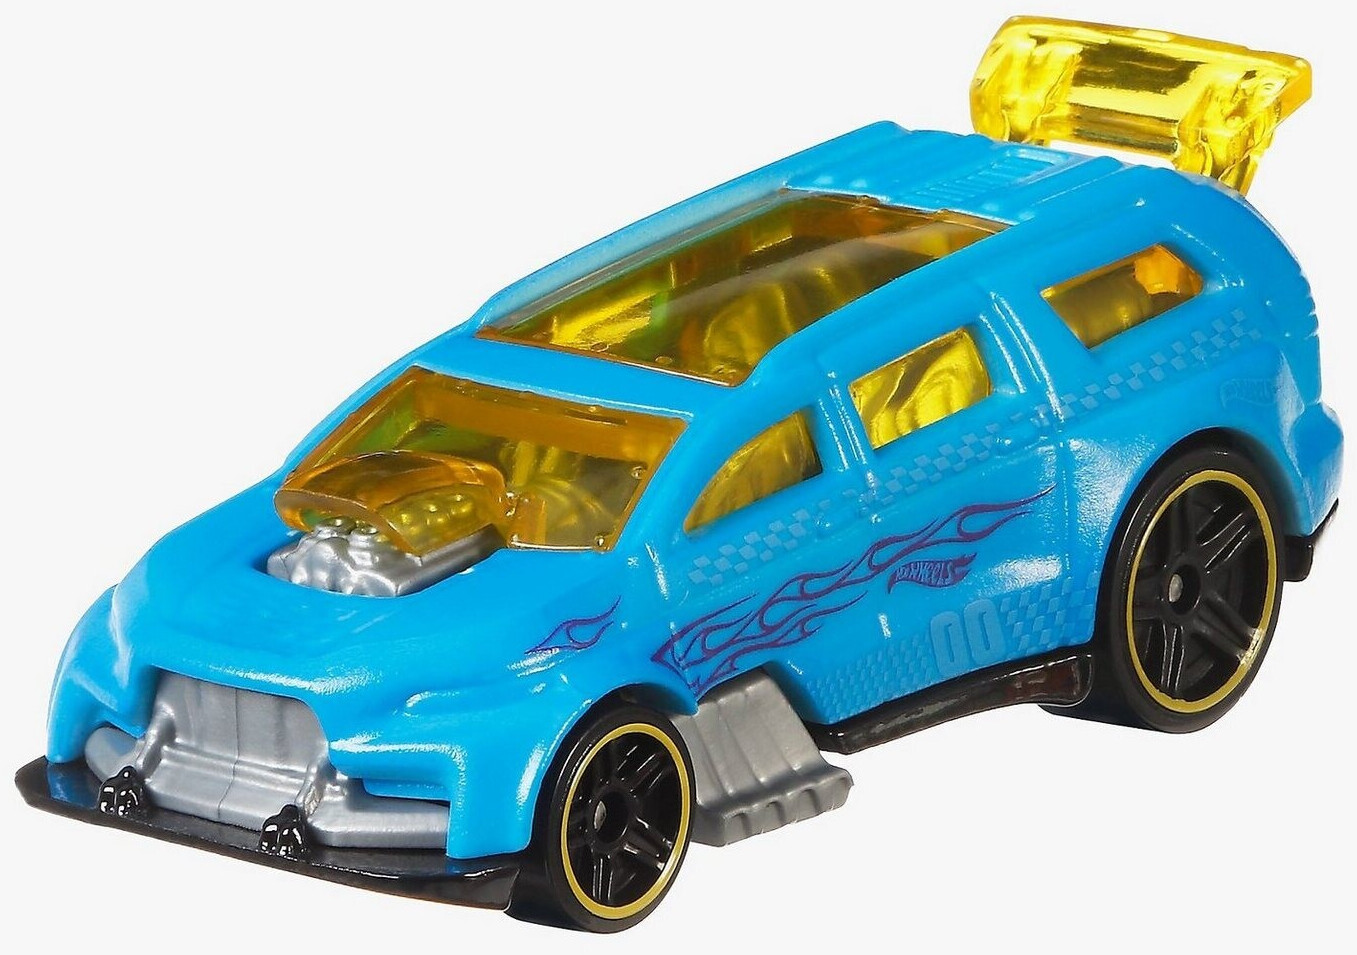 Best Buy: Hot Wheels Color Shifters Car (5-Pack) Styles May Vary GMY09